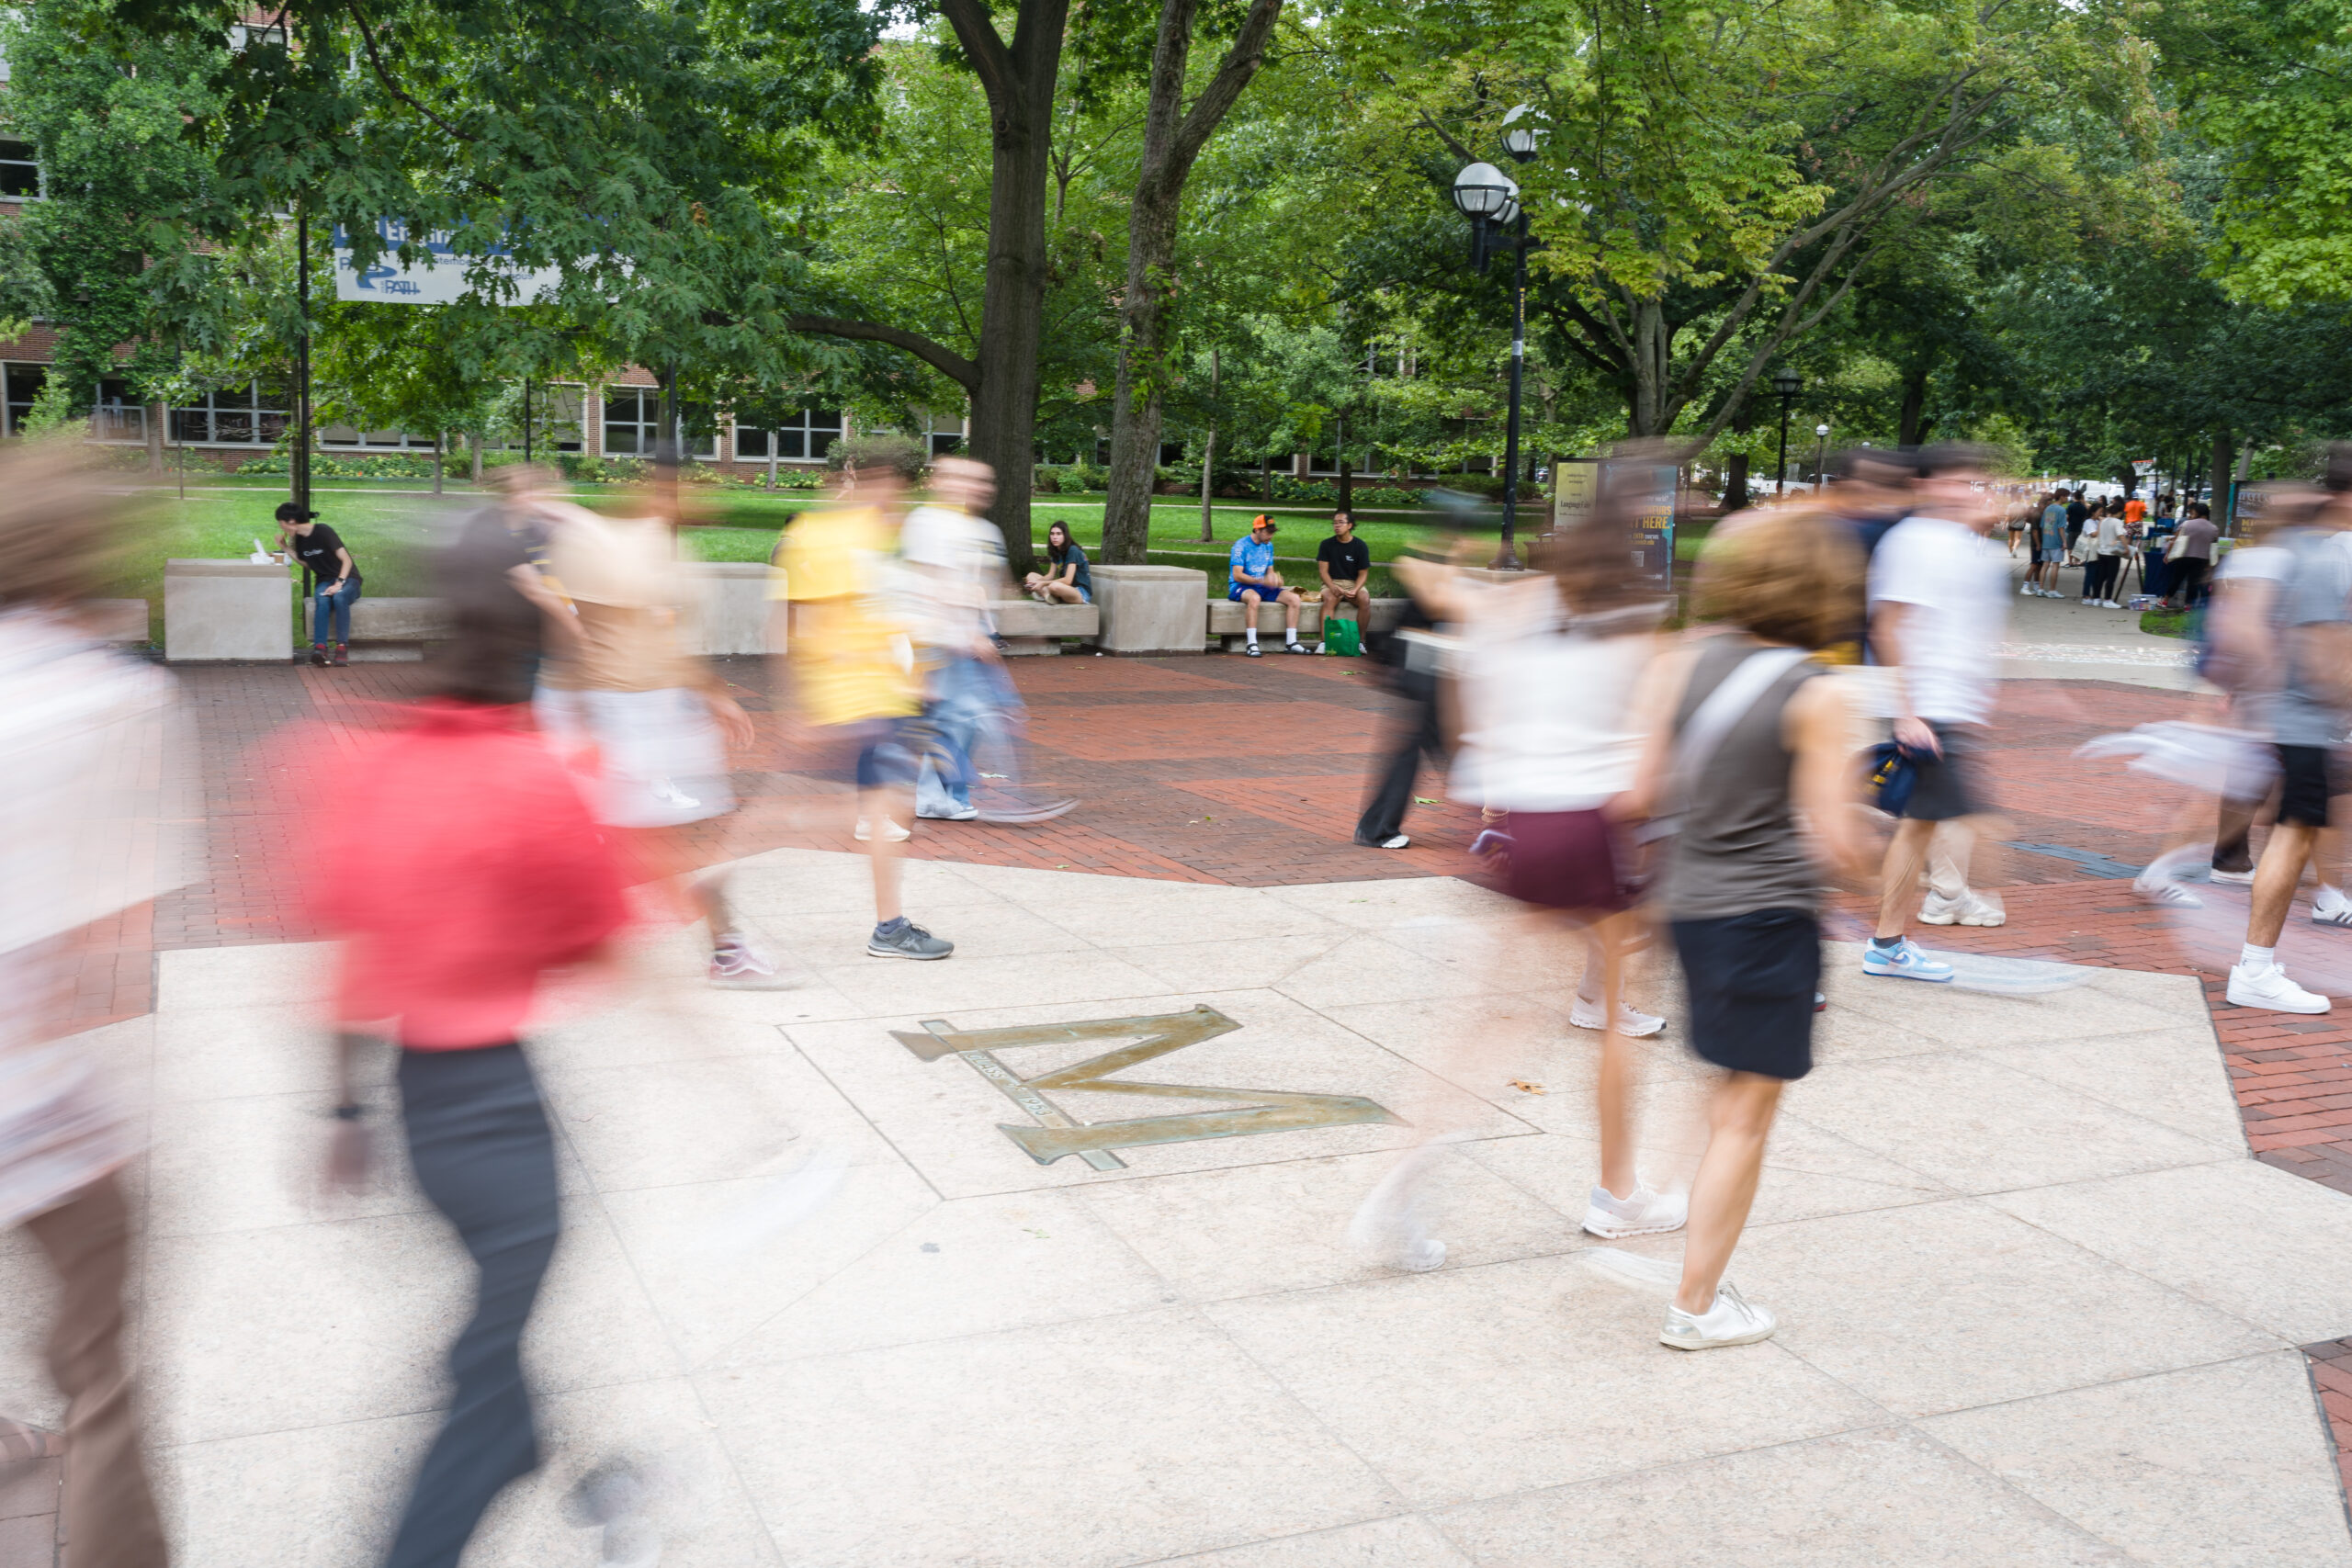 Blurred photo of groups of students walking through campus public space